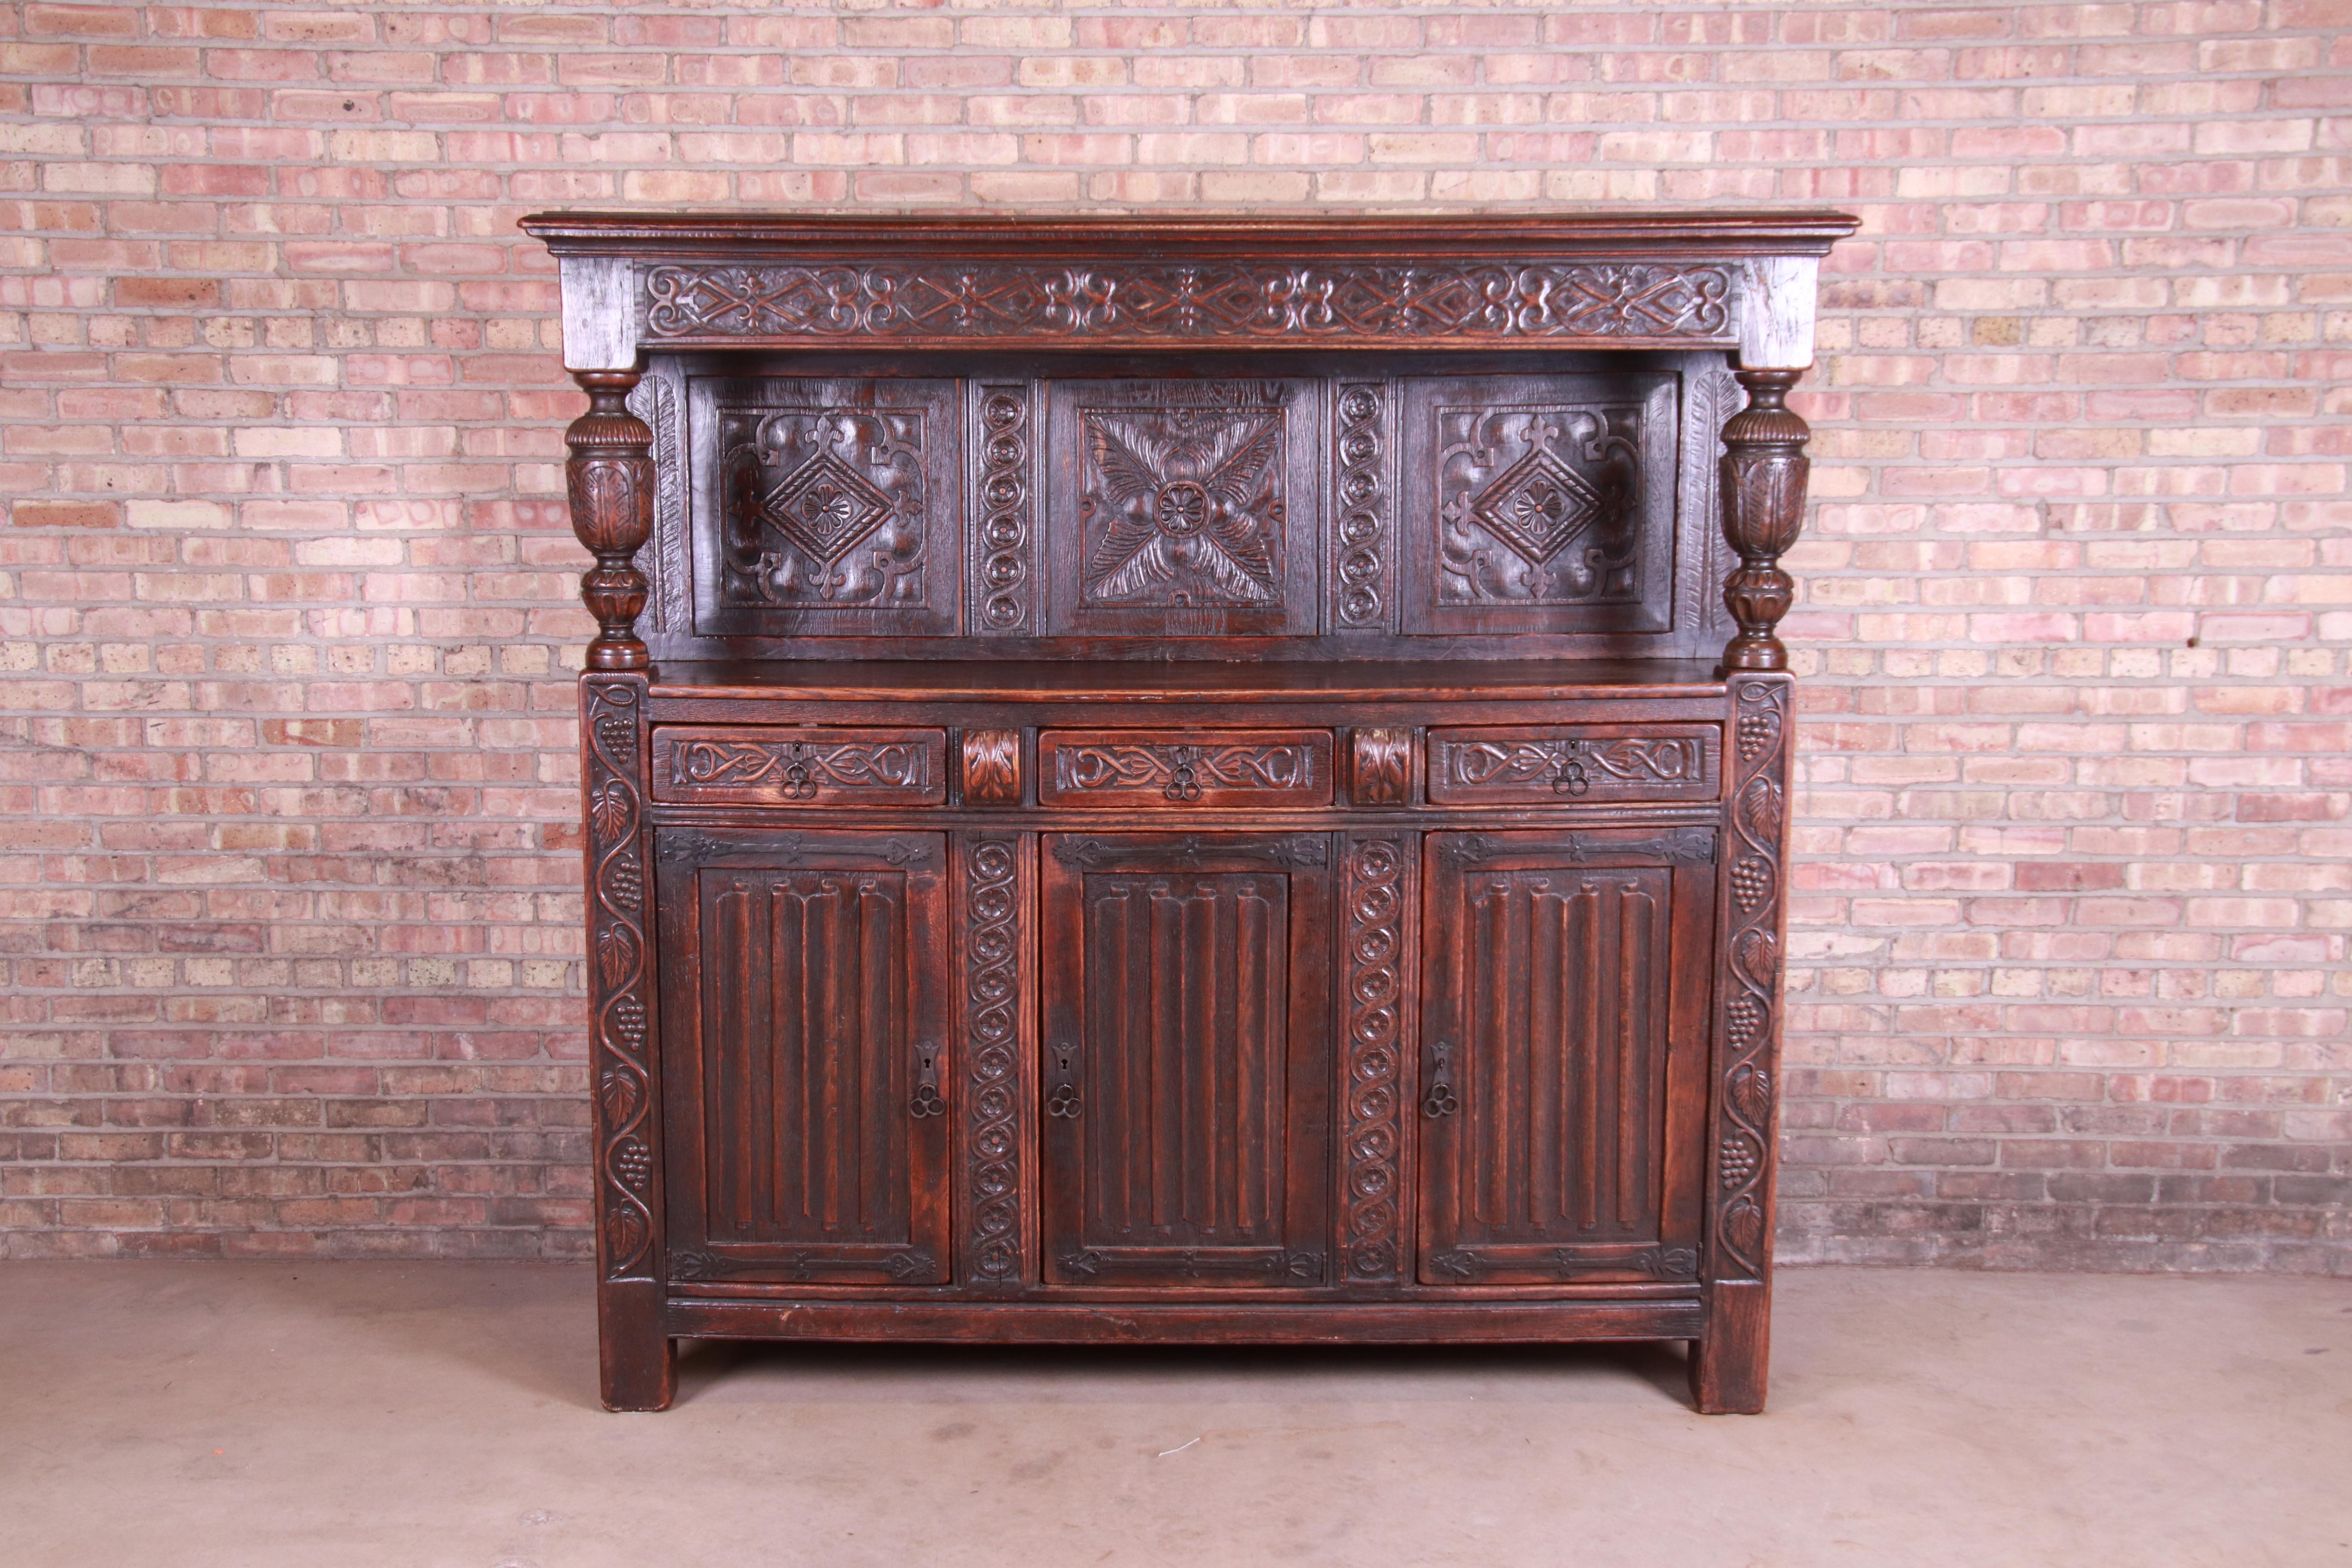 19th Century Antique Italian Ornate Carved Oak Sideboard or Bar Cabinet, circa 1800